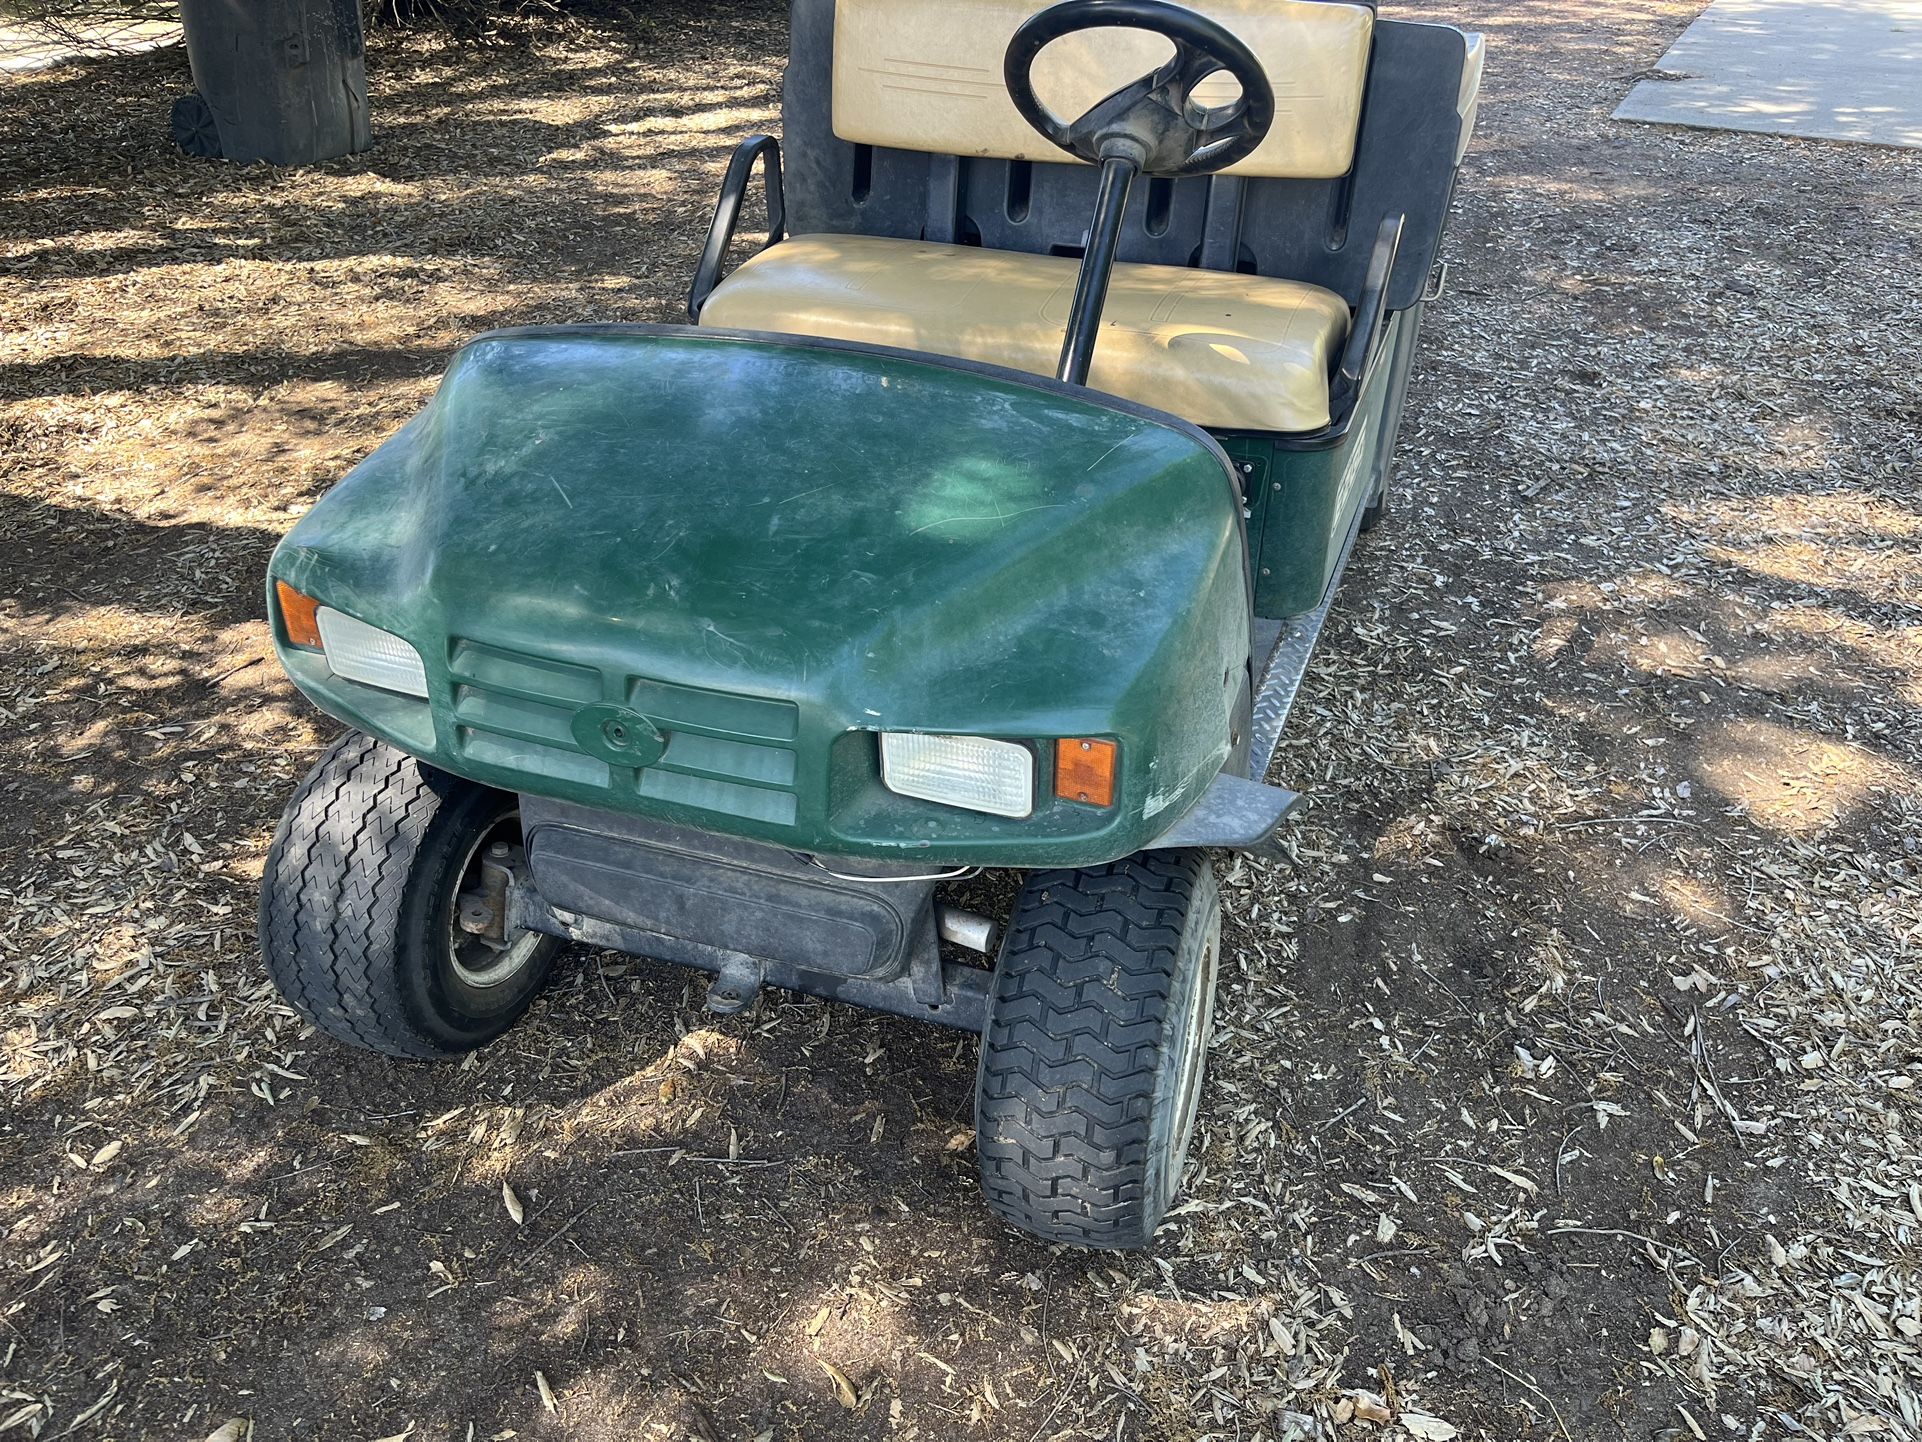 EZ GO Utility Farm Work Golf Cart. New Lithium Battery Installed. Works Great. Looks Very Good